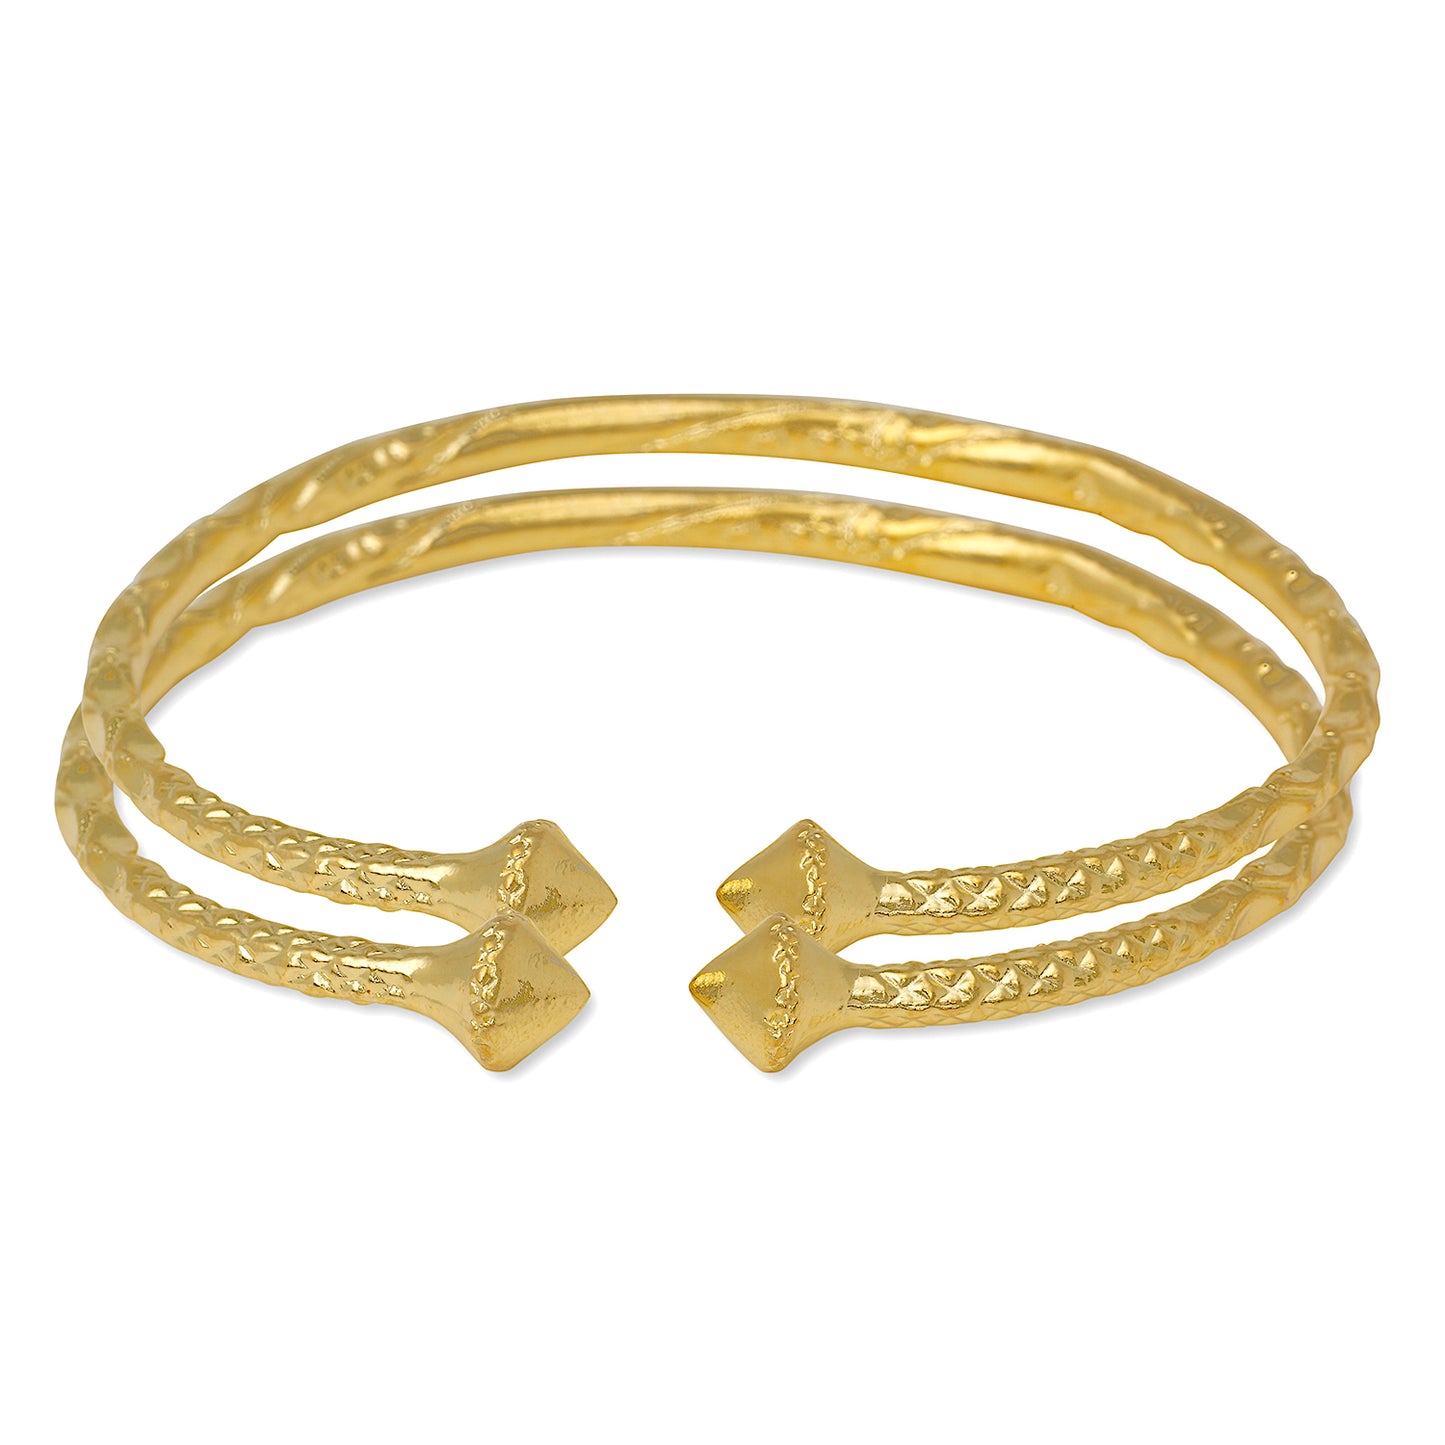 Better Jewelry Twisted Cone Bangles 14K Gold Plated .925 Sterling Silver Bangles, 1 pair